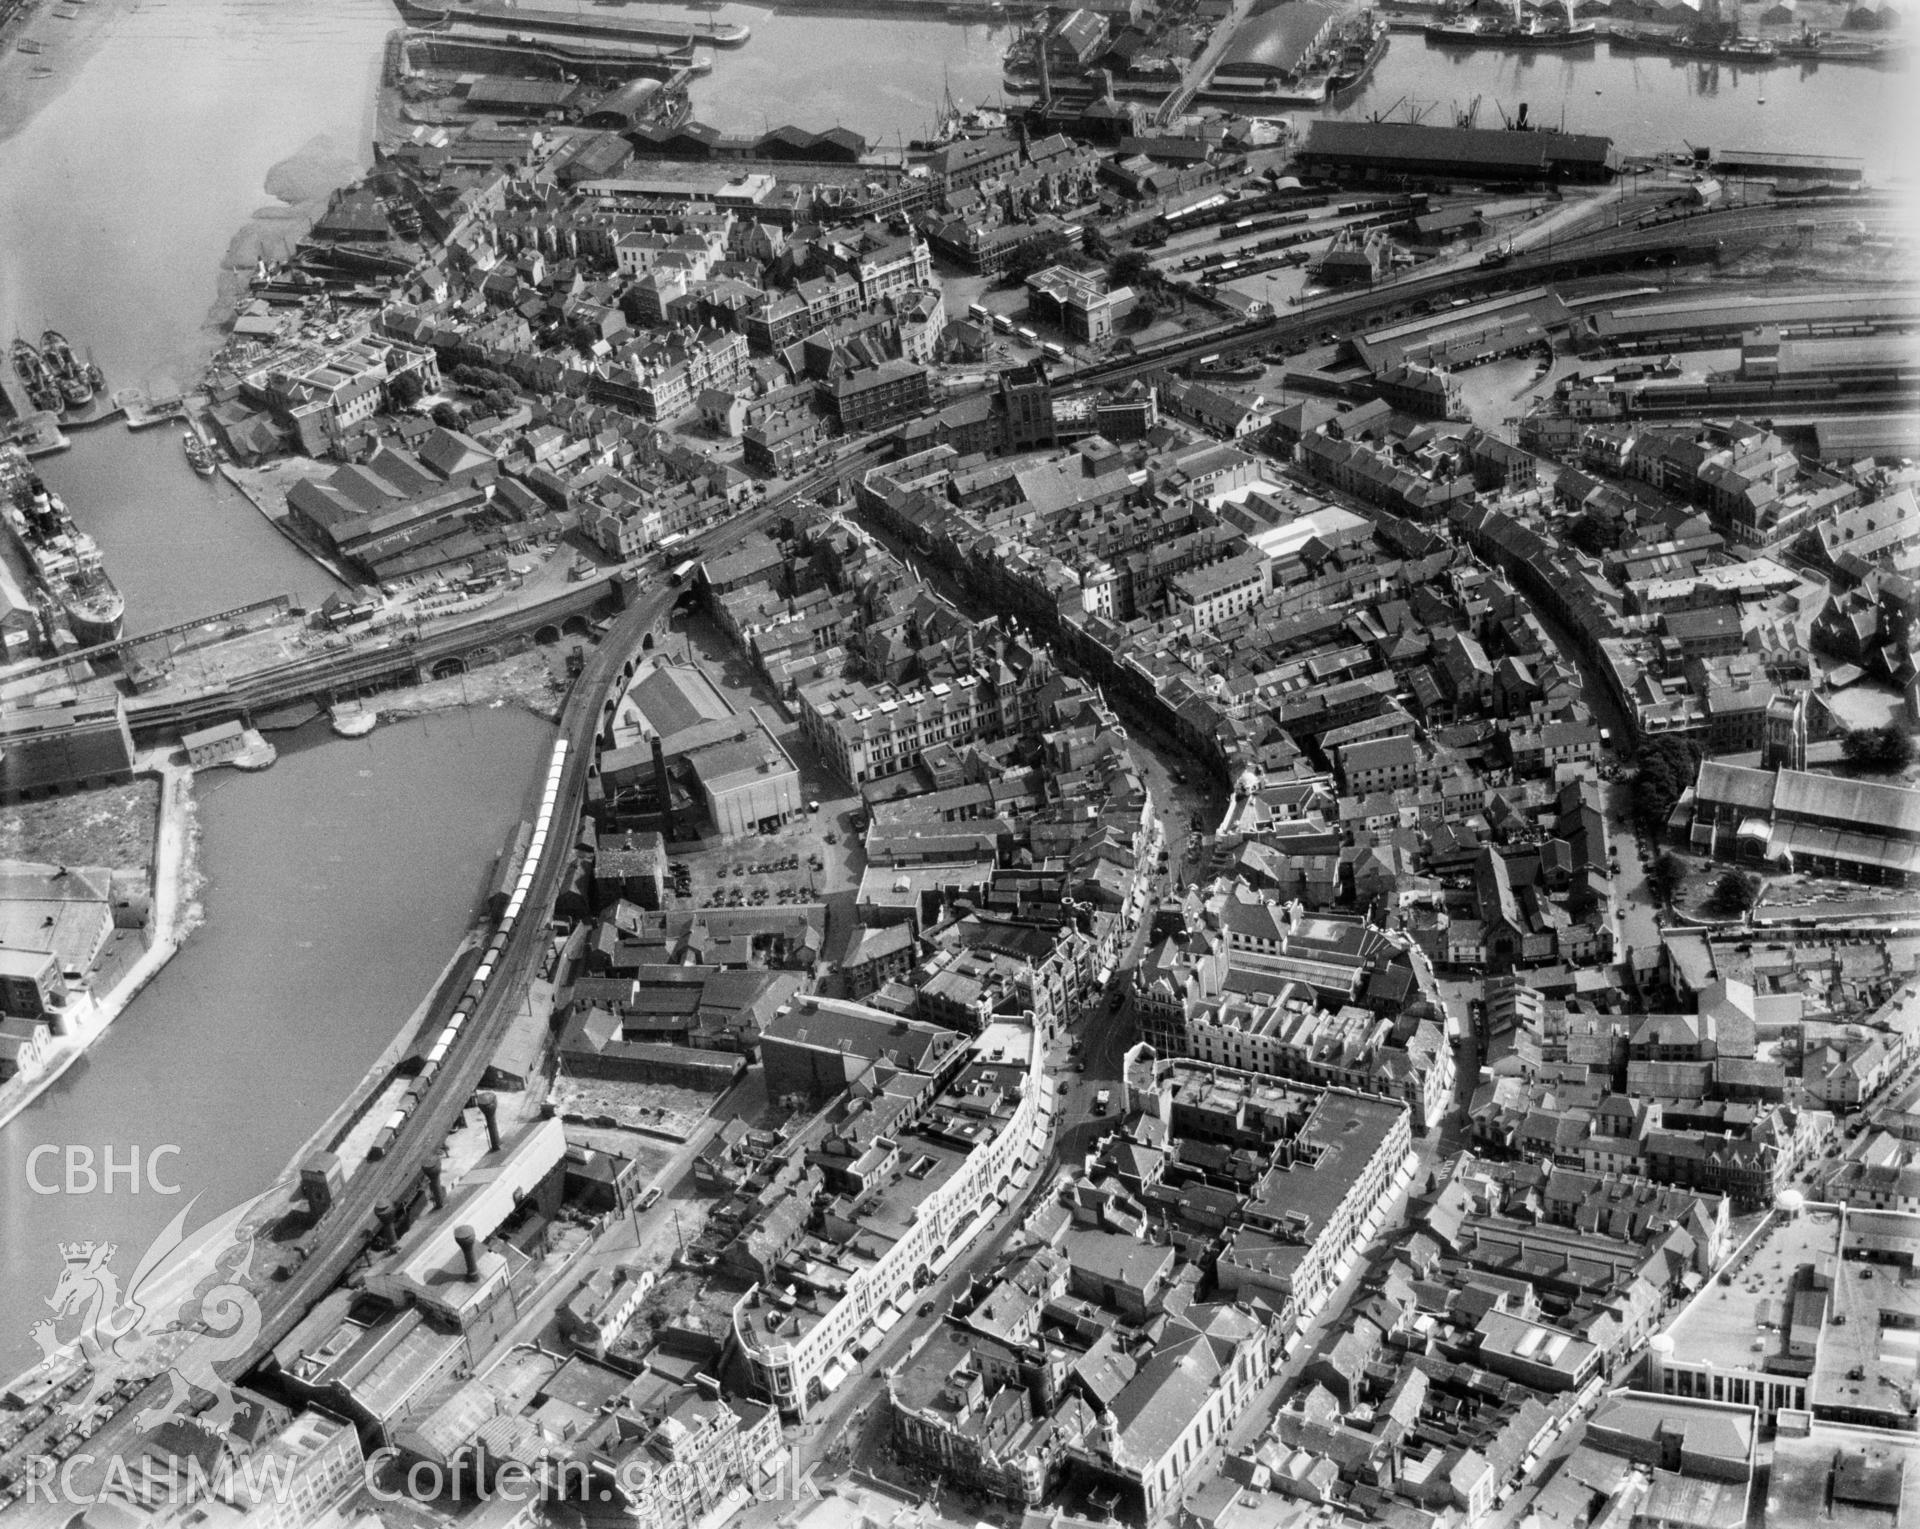 View of Swansea, oblique aerial view. 5?x4? black and white glass plate negative.